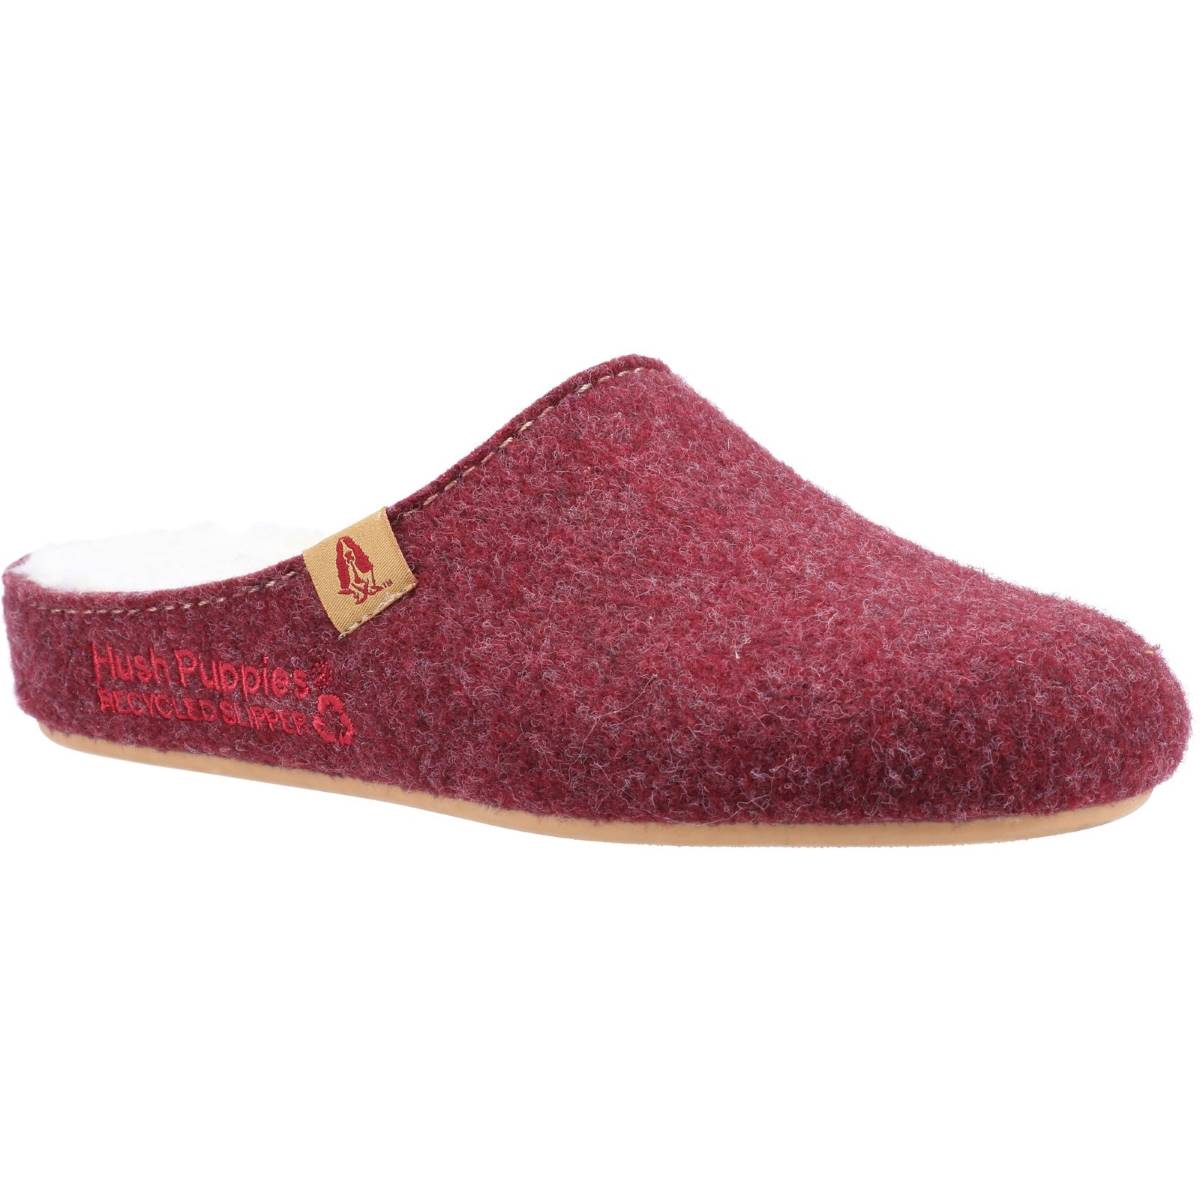 Hush Puppies The Good Slipper Burgundy Womens slippers HPW1000-199-1 in a Plain Textile in Size 8